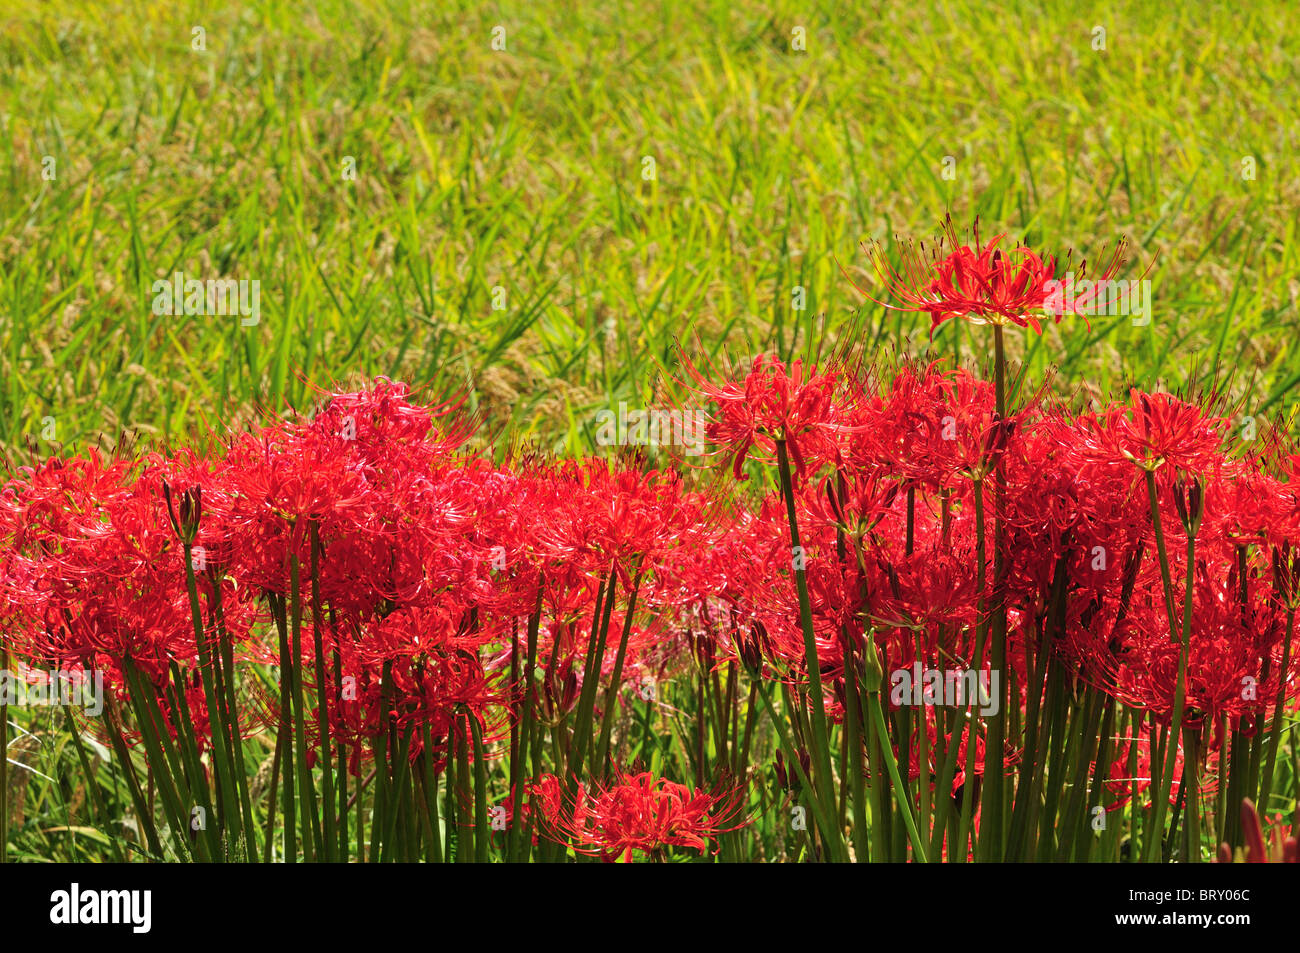 Red Spider Lily and the Rice Field Stock Photo